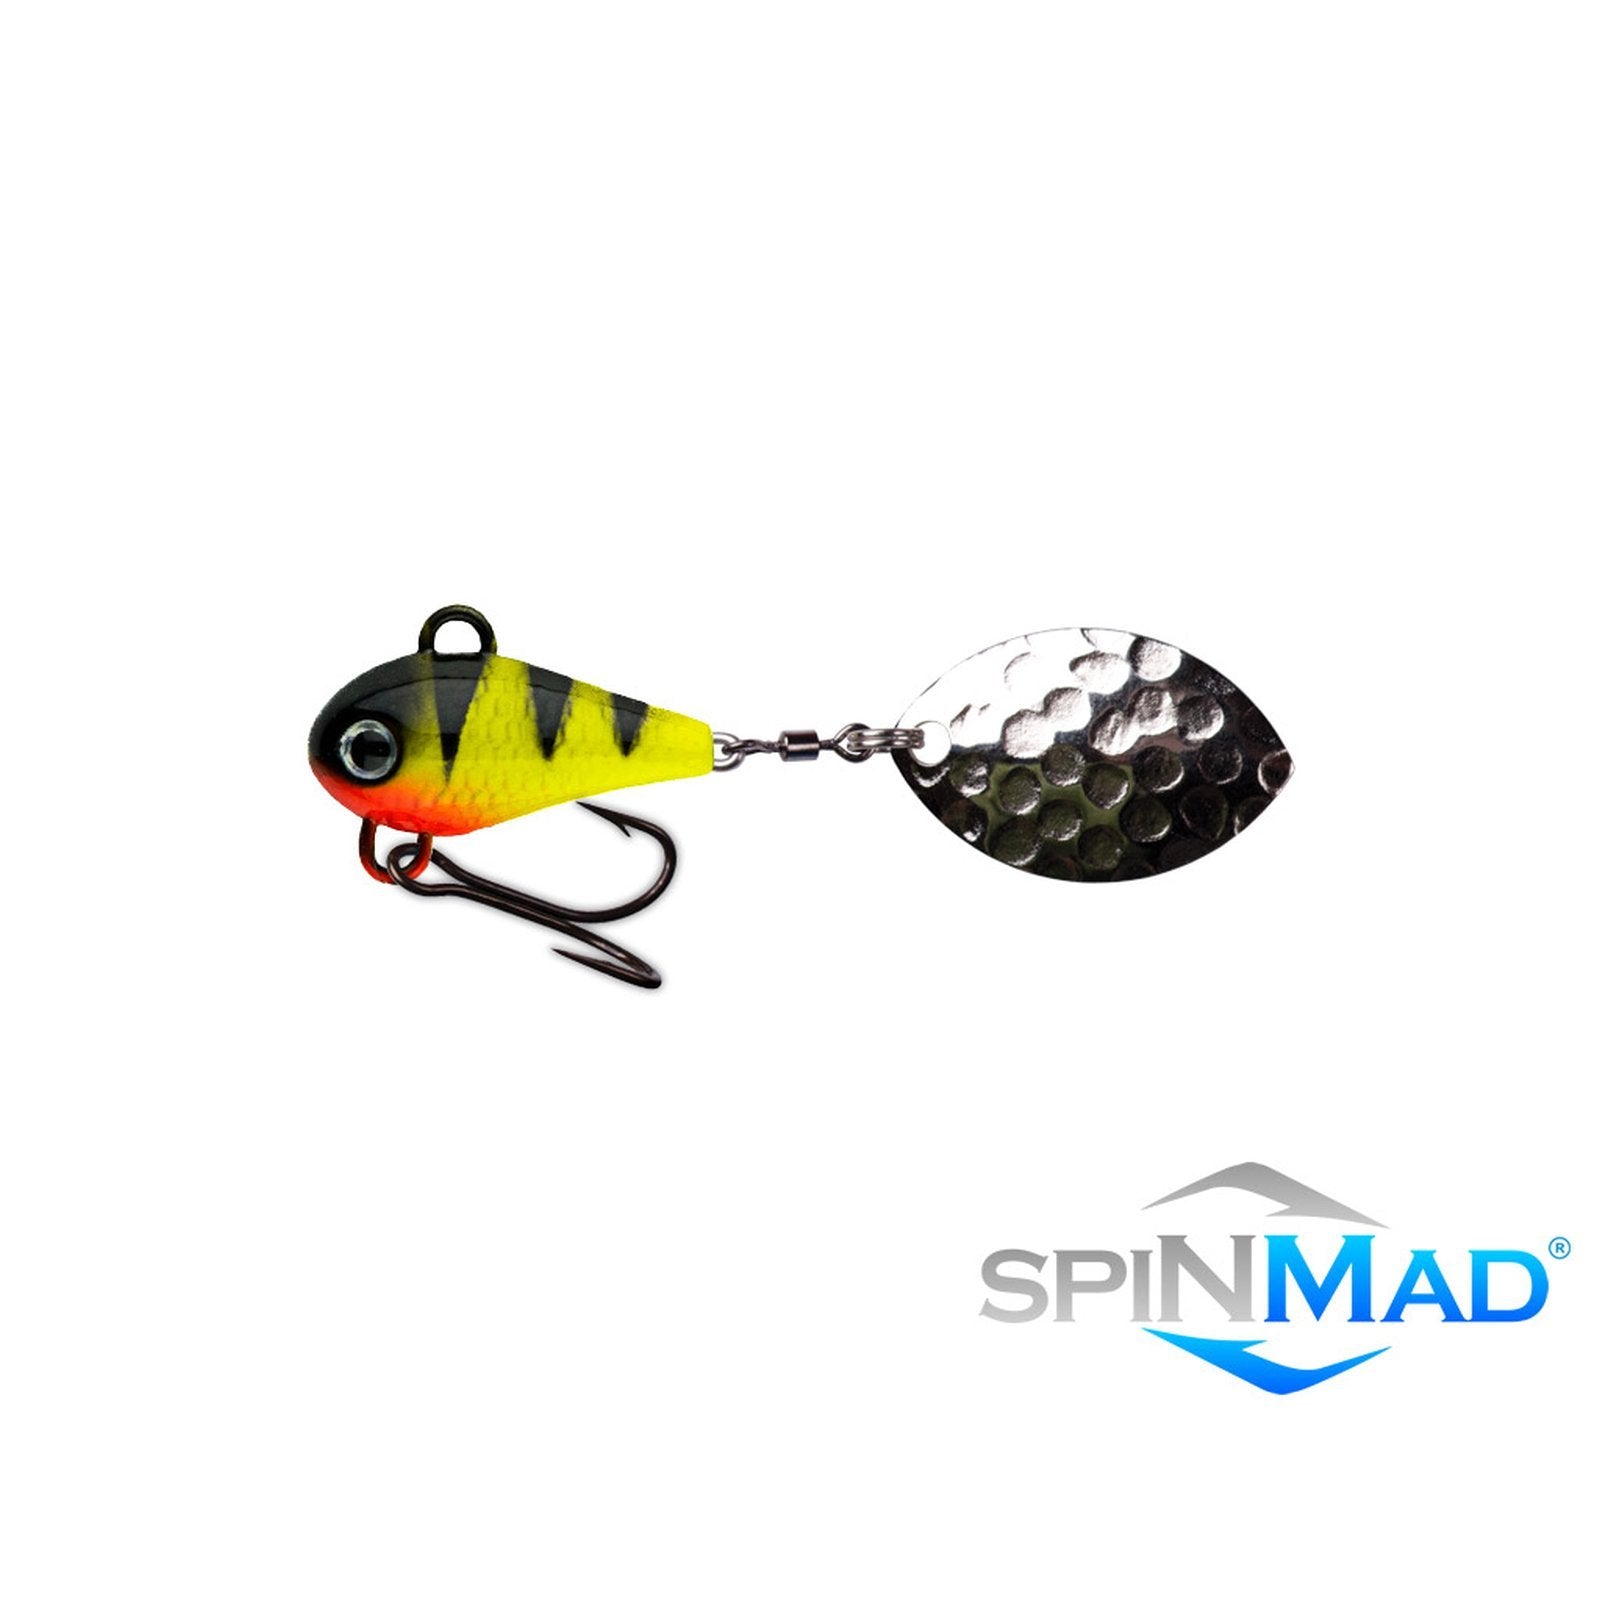 SpinMad MAG 6 0714